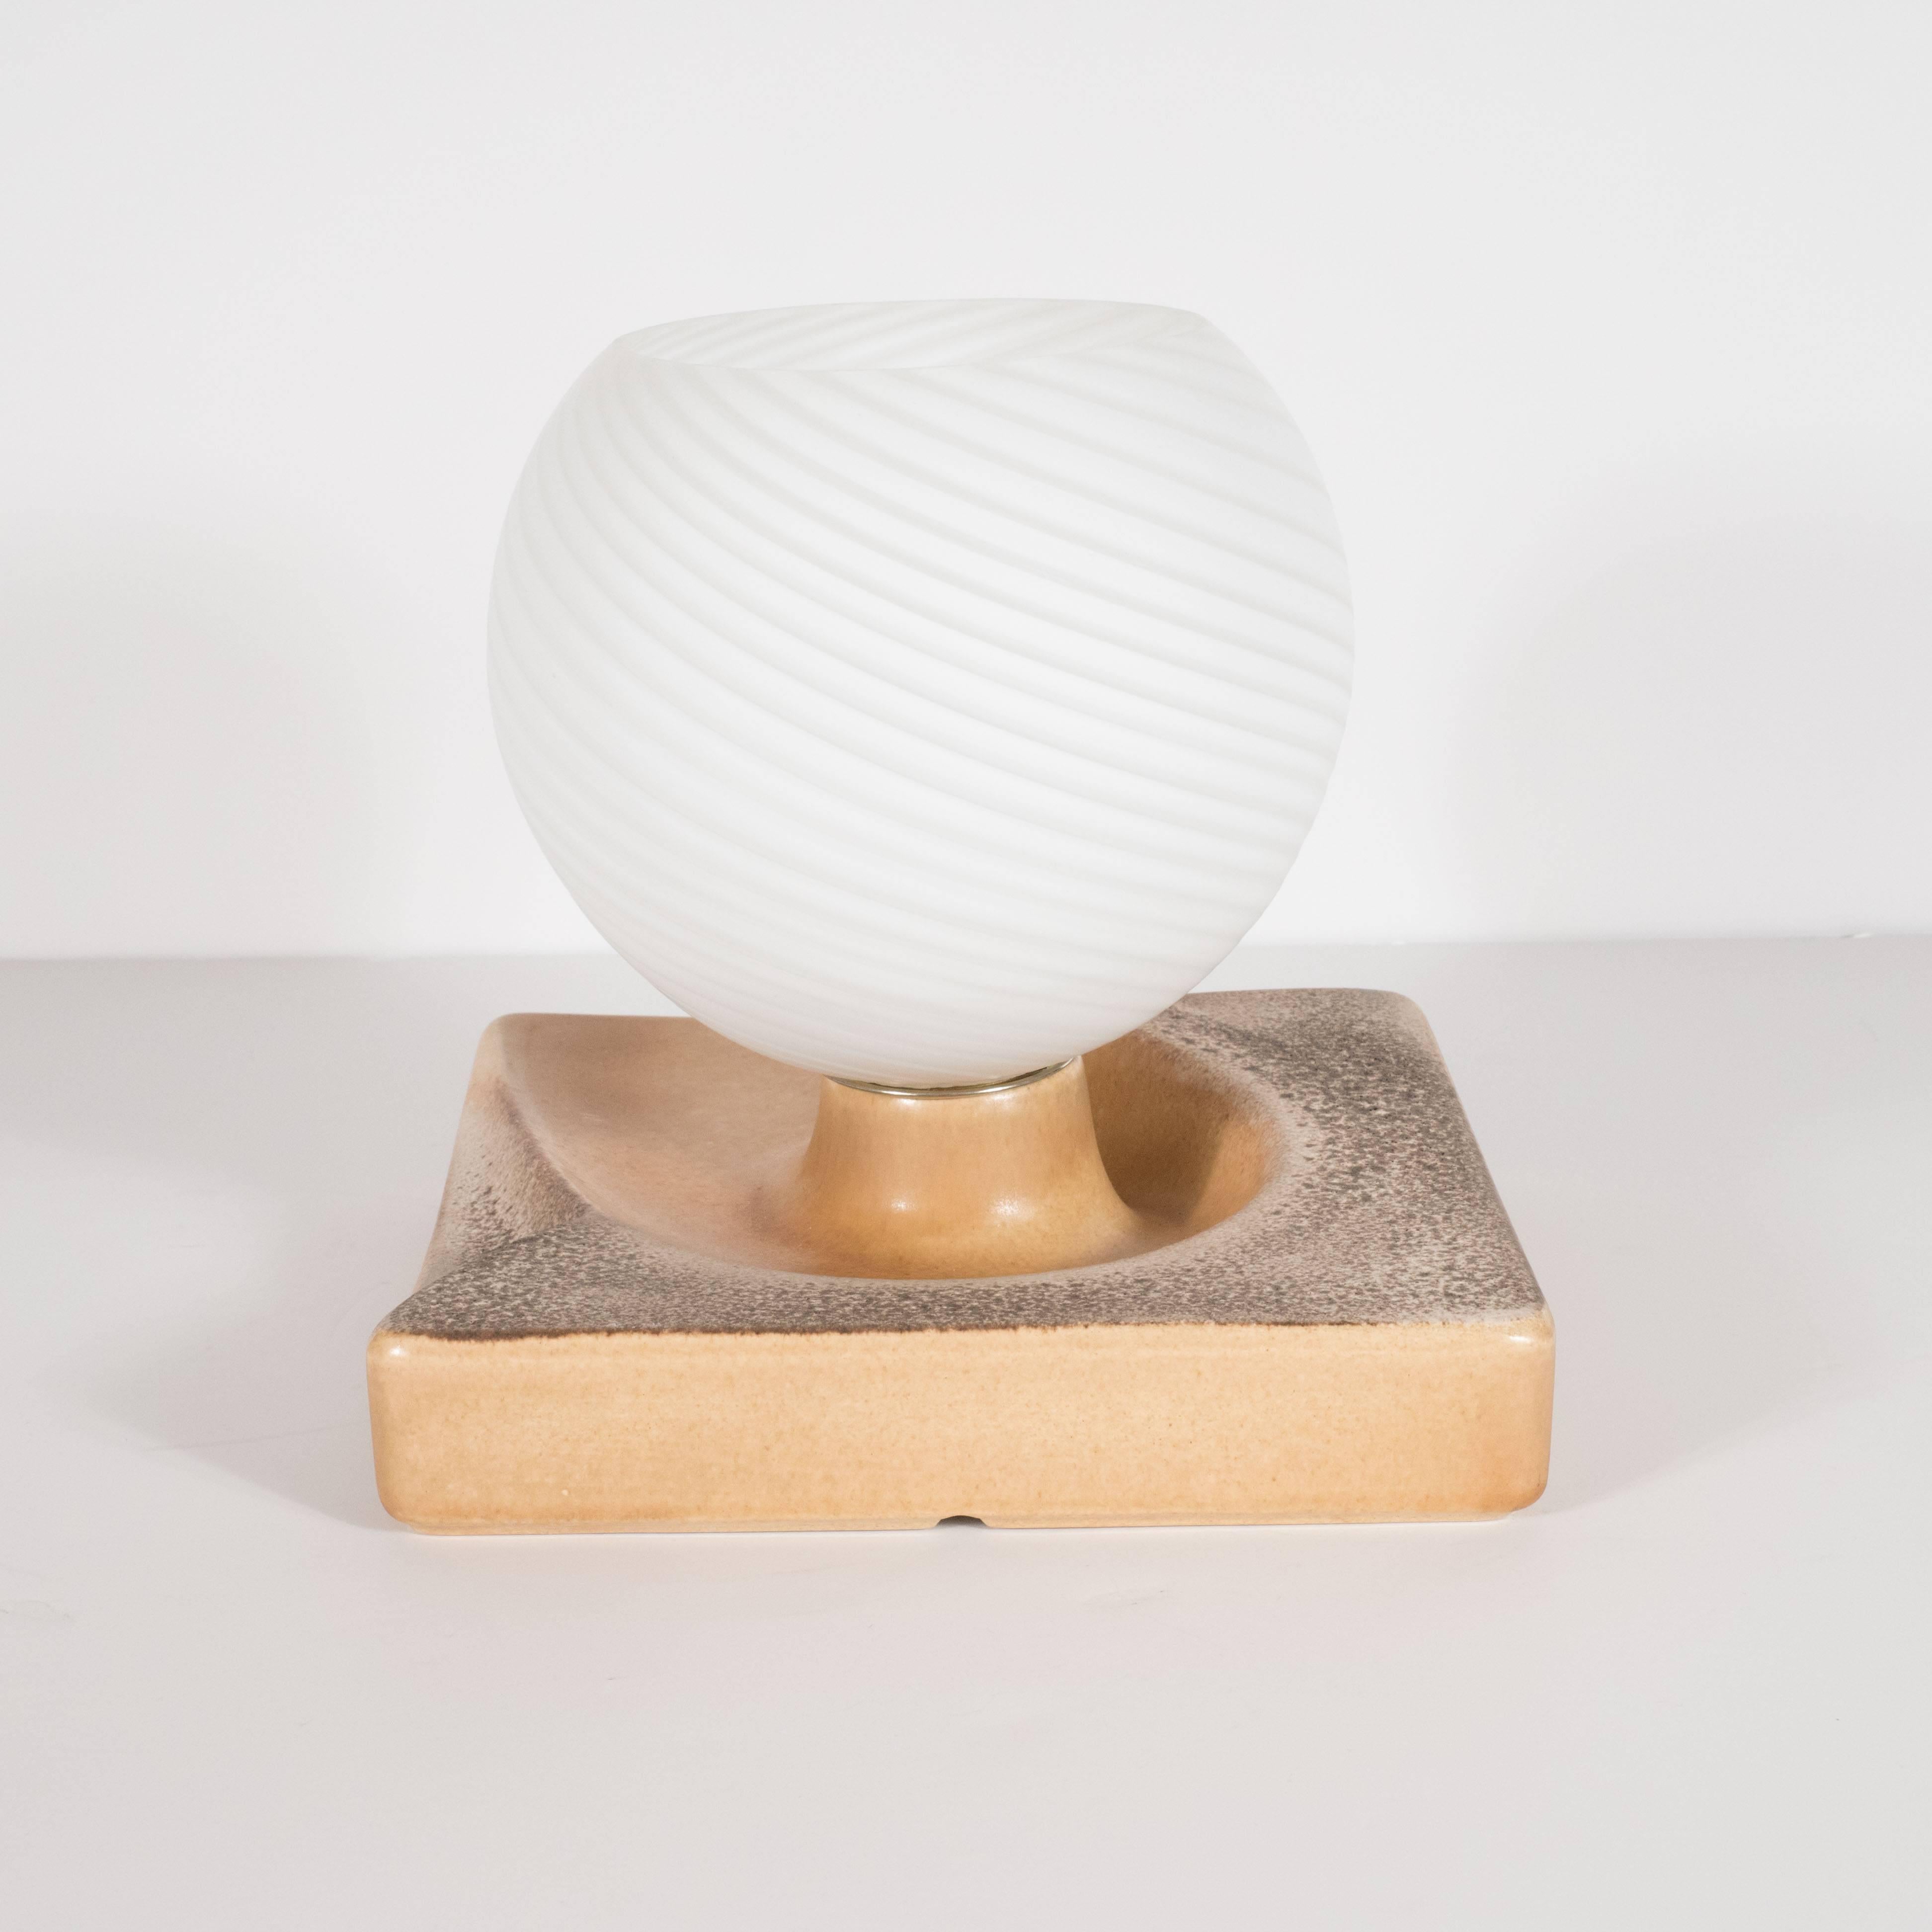 Replete with earth tones and a stunning crème brûlée glazed ceramic, this rare uplight was realized in Germany, circa 1960. It is an excellent example of the time and place. Its square body offers gentle curving contours that have a nearly